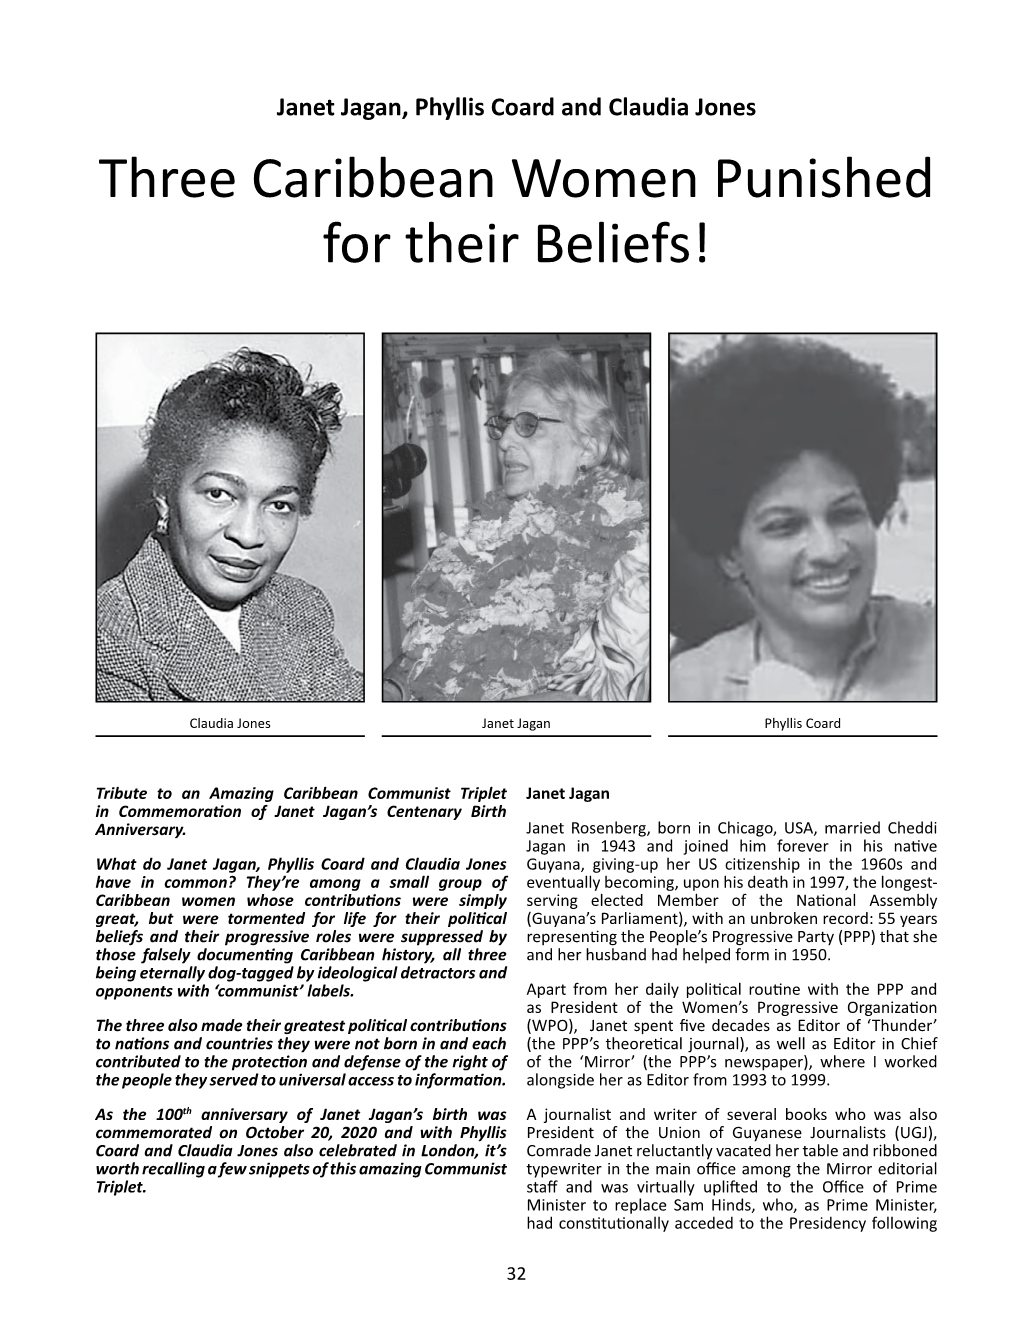 Janet Jagan, Phyllis Coard and Claudia Jones Three Caribbean Women Punished for Their Beliefs!